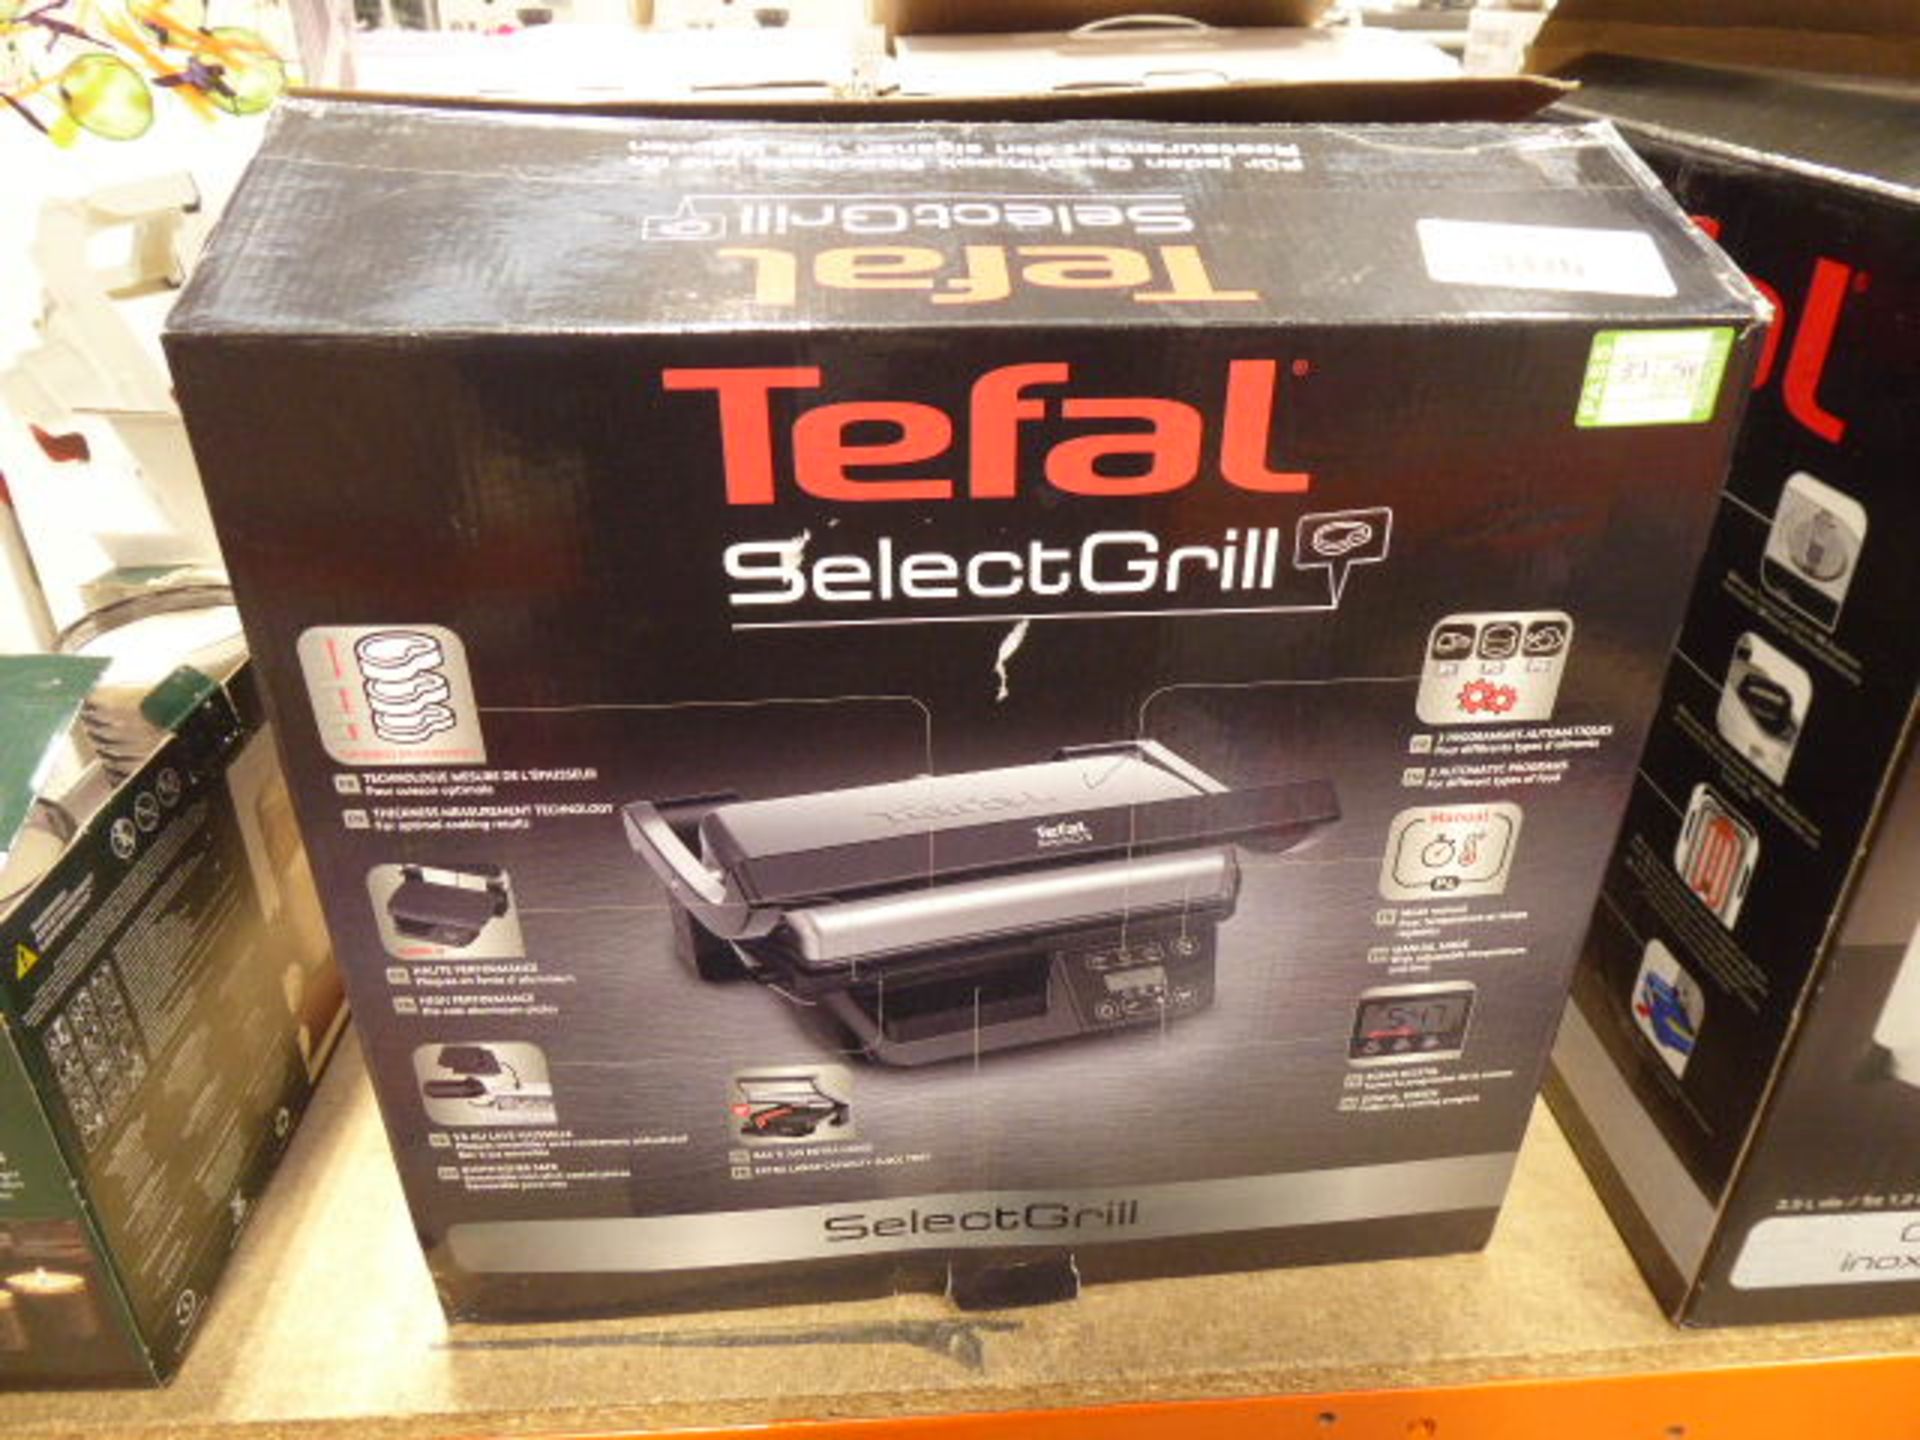 Boxed Tefal Select grill